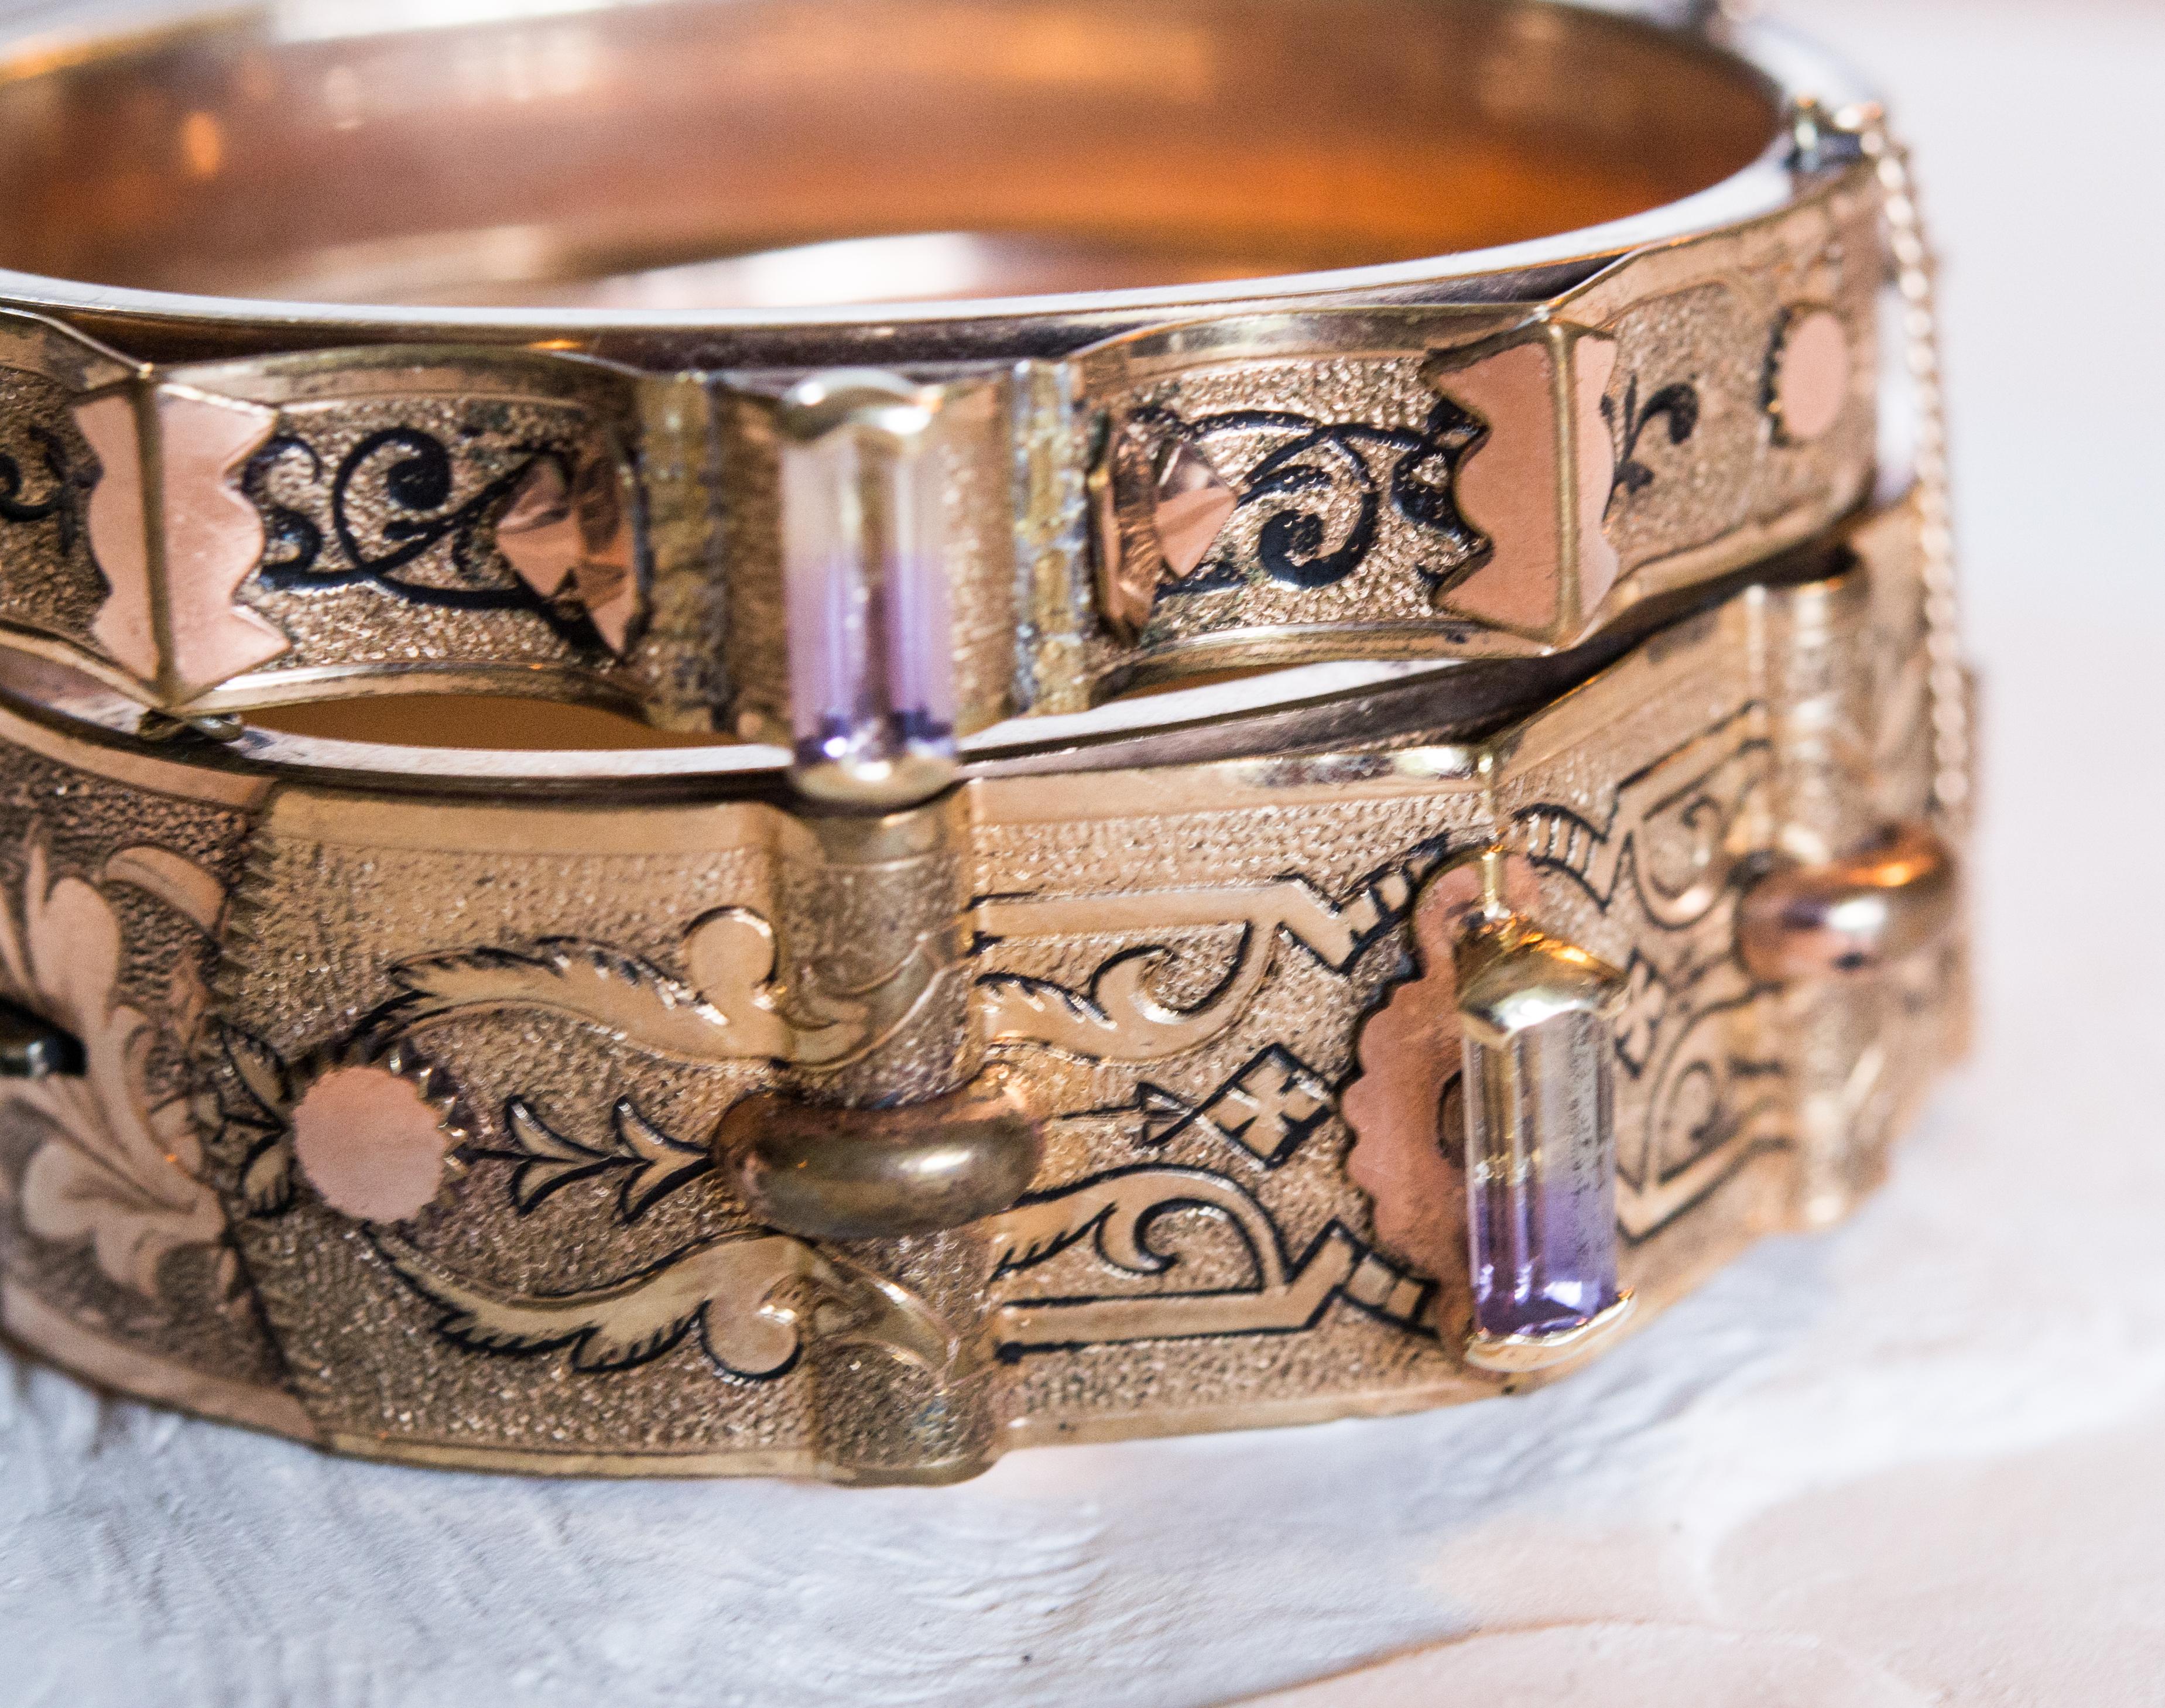 Be mine forever, dear
10k gold Original Bates and Bacon bangle circa 1860 USA,
ametrine baguette capped in 14k gold
A talisman to honor commitment. Show up and be fully present.
The way you do anything is the way you do everything. Be
committed to